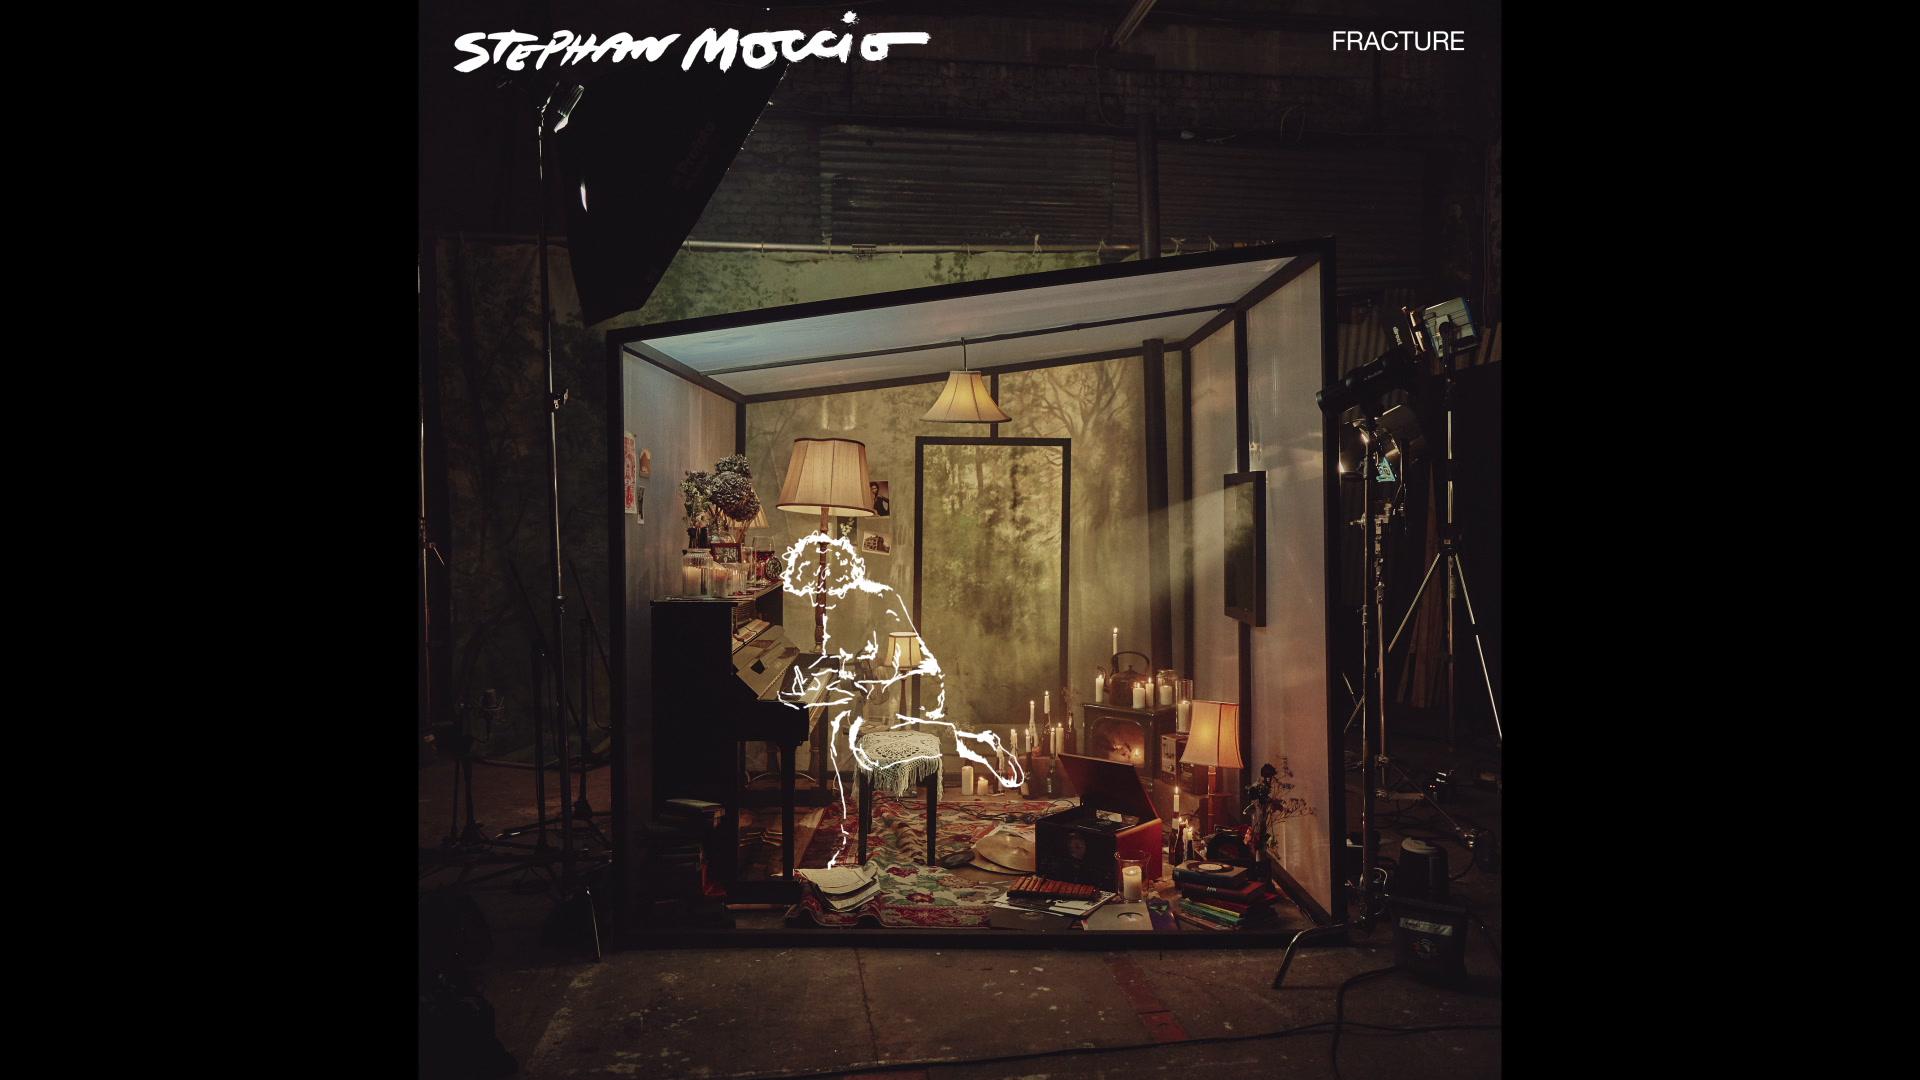 Stephan Moccio - Fracture